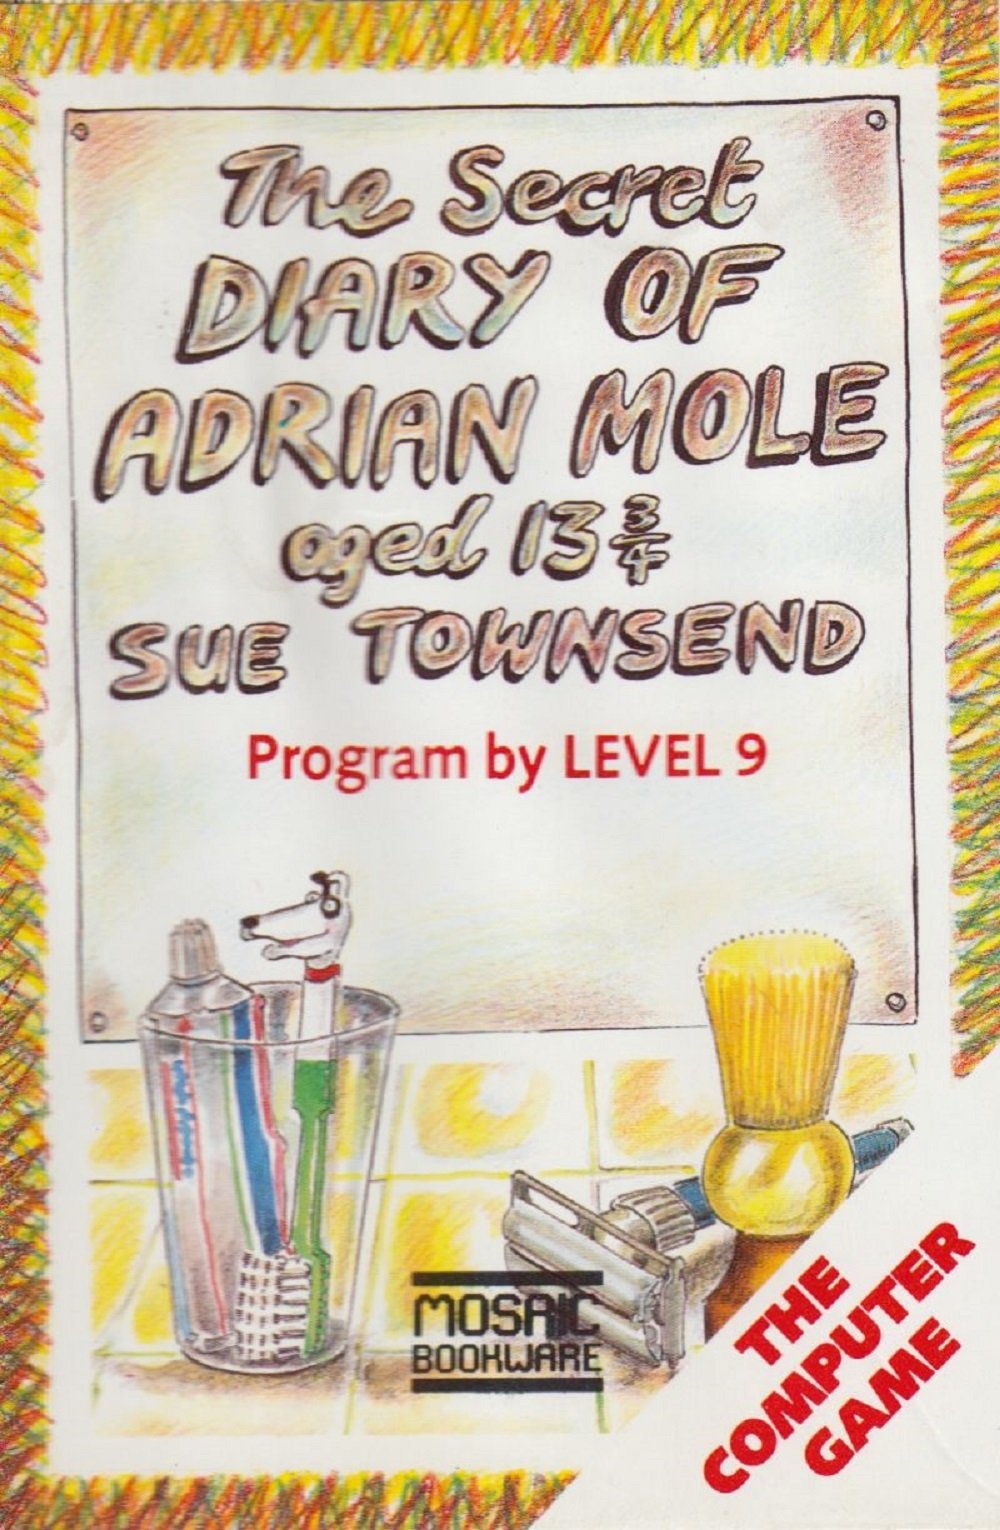 Image of The Secret Diary of Adrian Mole Aged 13¾